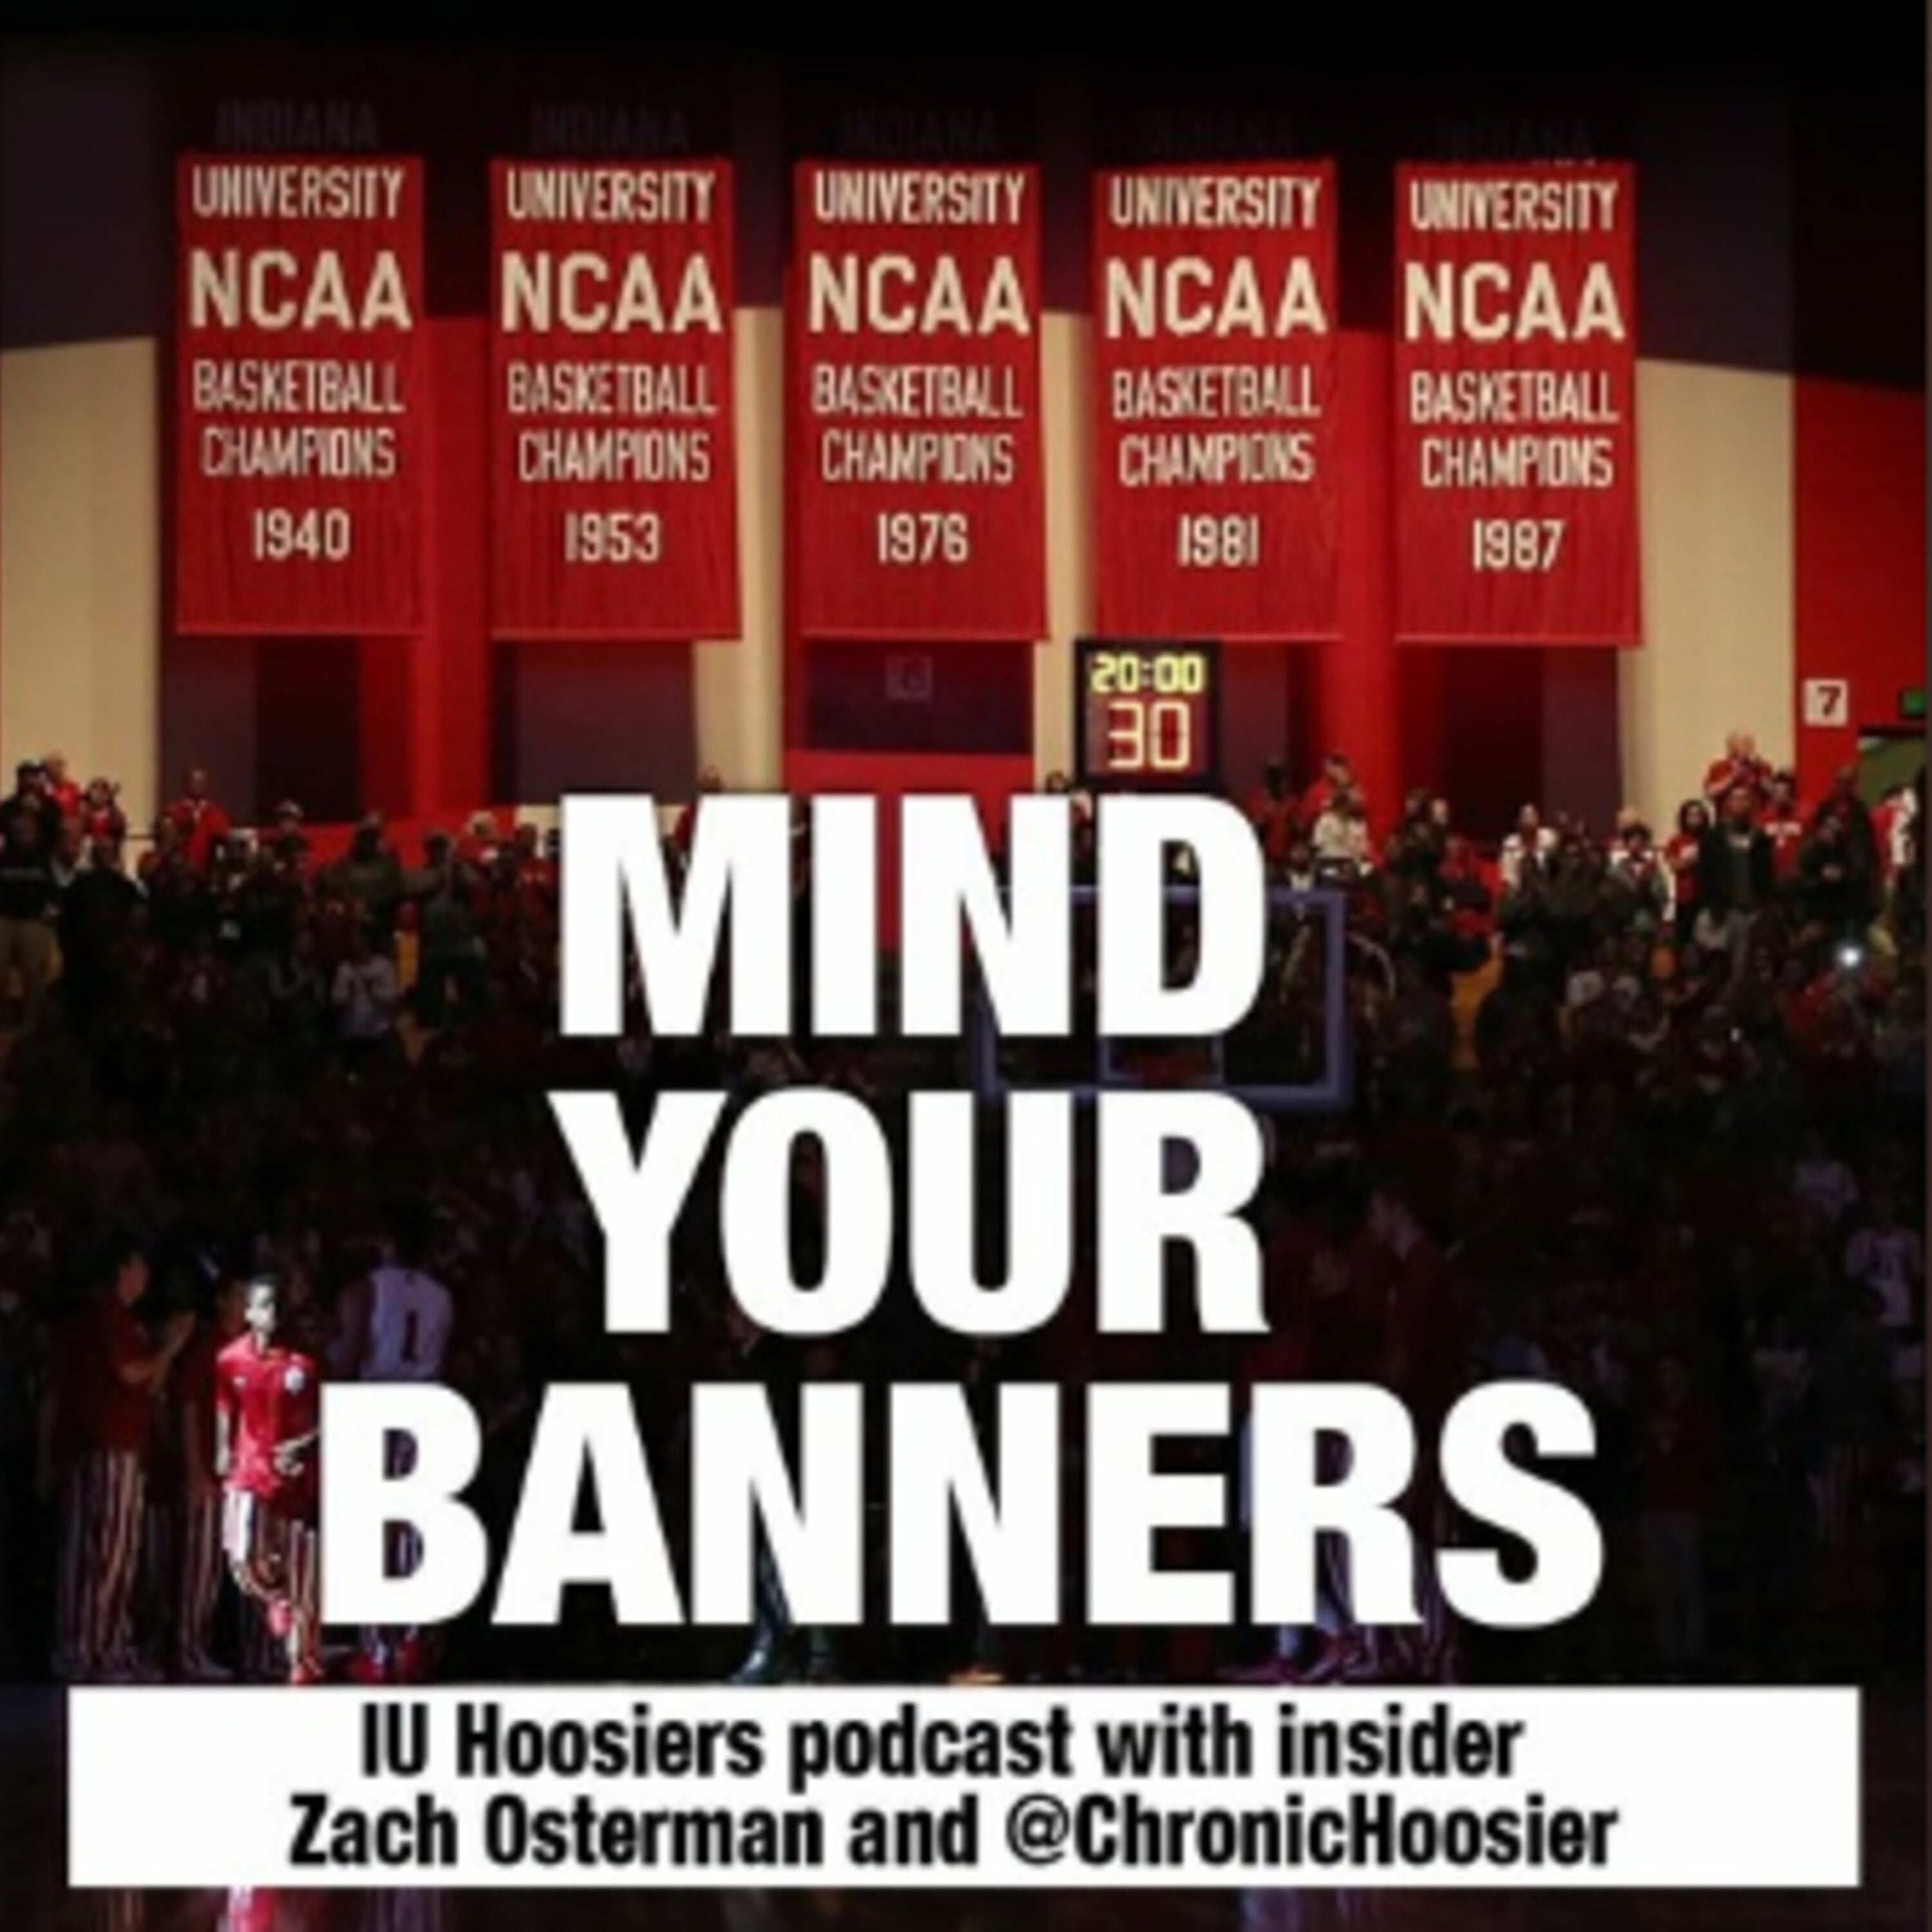 Mind Your Banners: Tom Allen out after seven years at Indiana